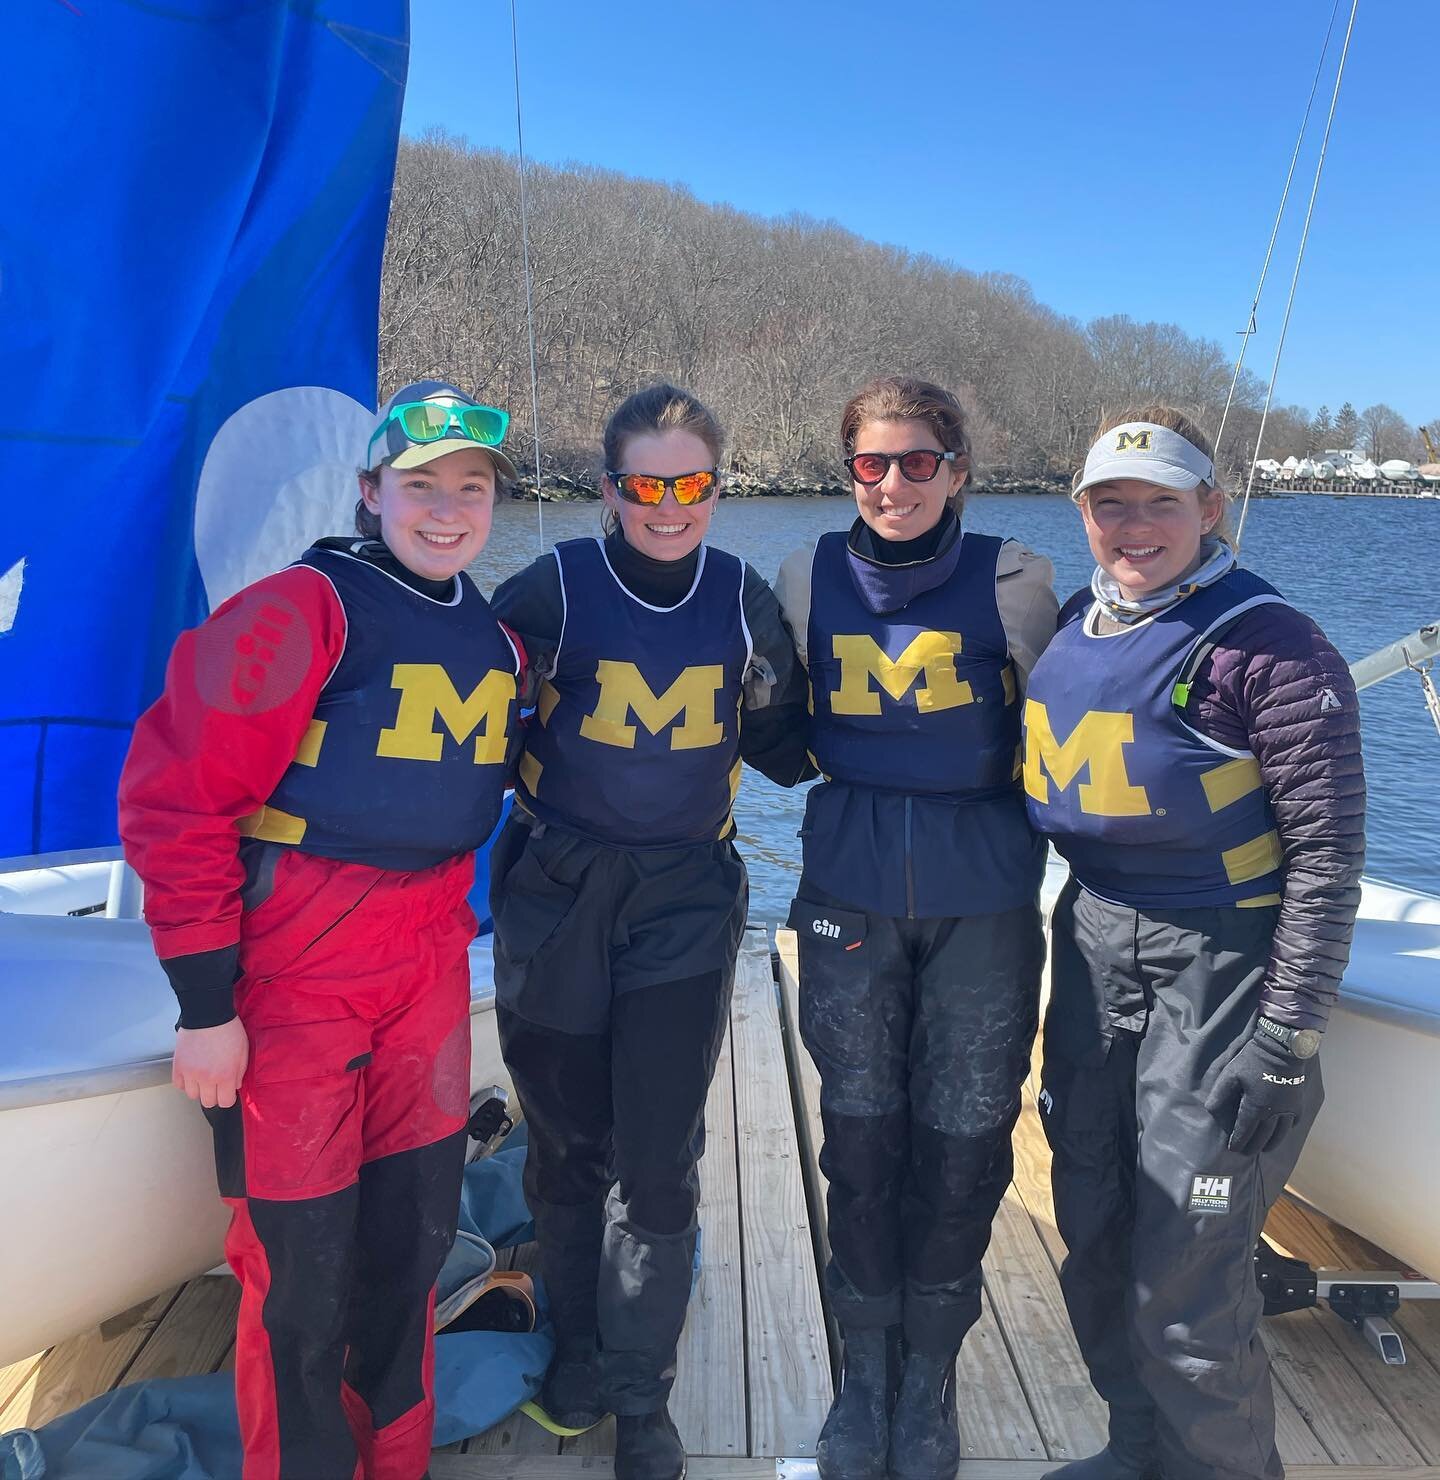 This weekend, our women&rsquo;s team traveled out east to Connecticut to compete at the Emily Wick Regatta! With two full days of racing, the team still managed to stop for a full seafood dinner. Good job ladies, and Go Blue!